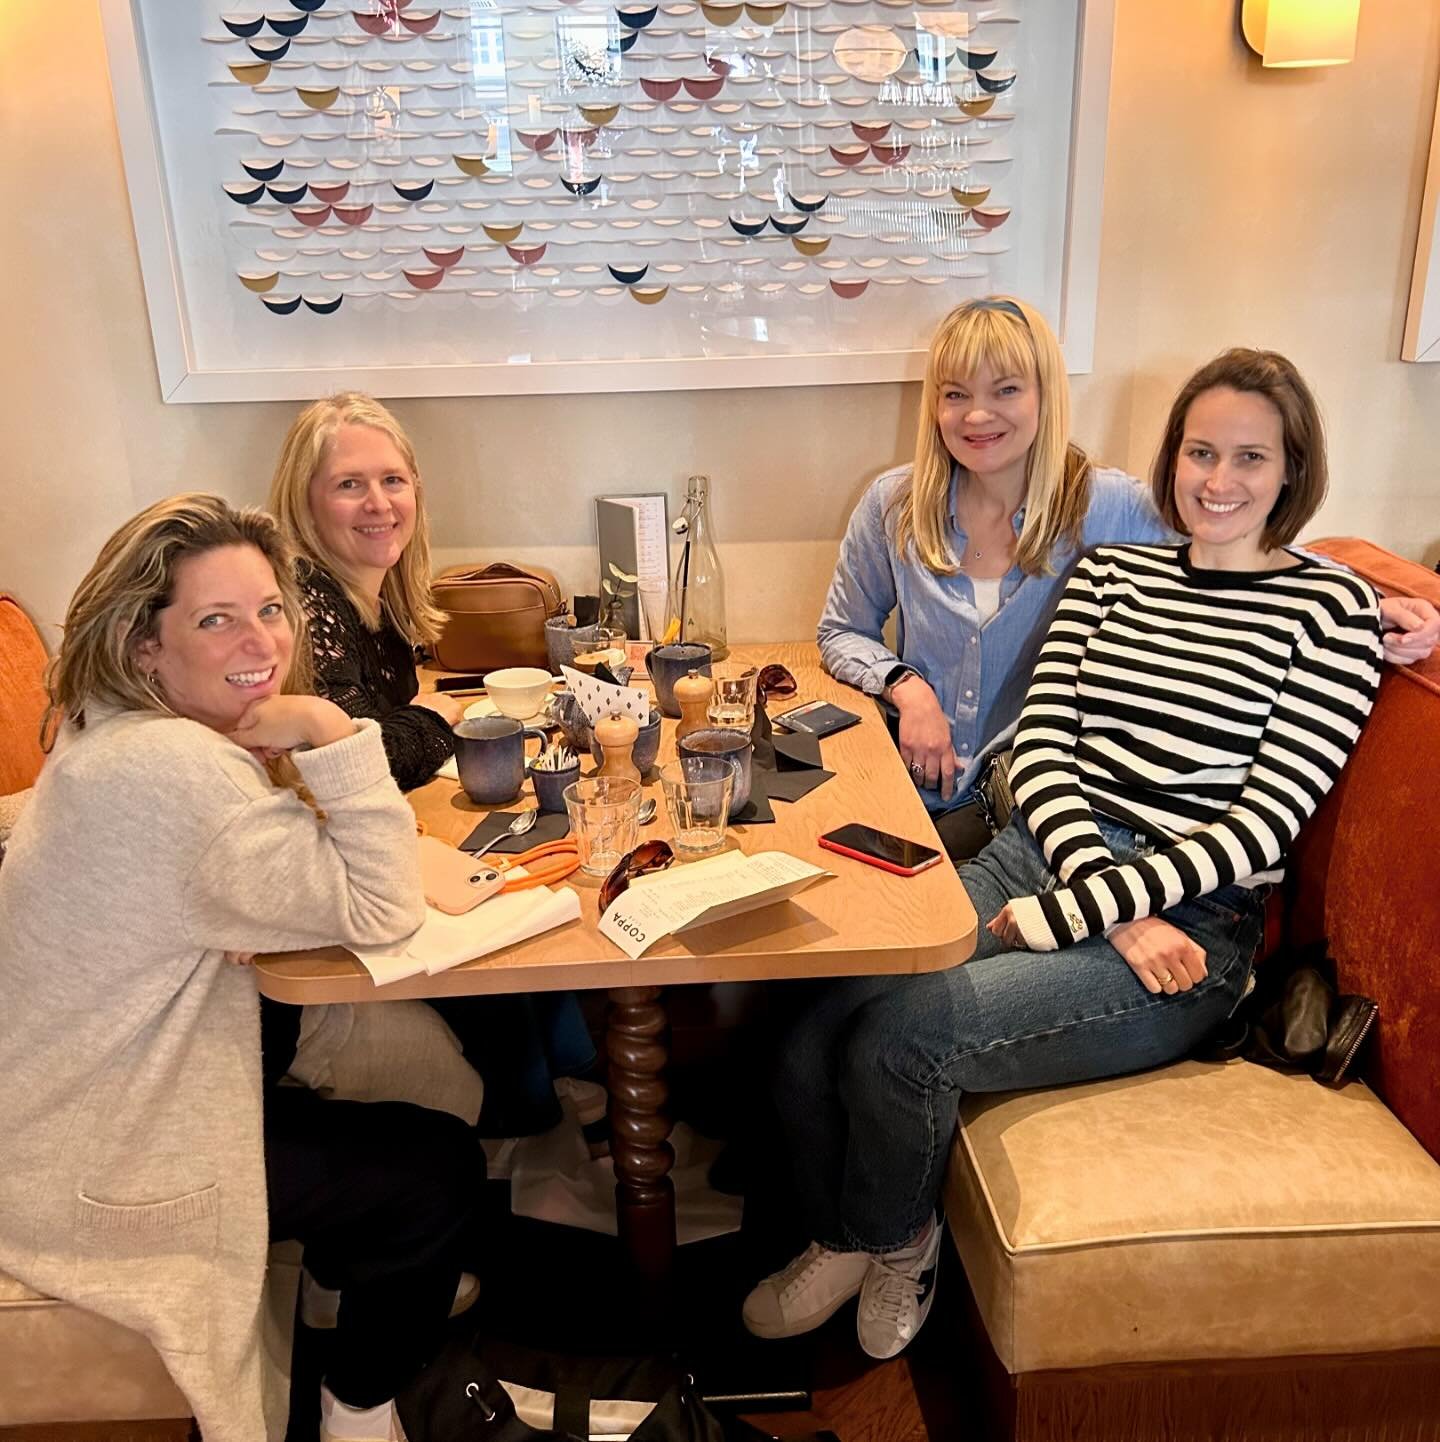 April photo dump! What a mixed bag this month was&hellip; 

Highlights: lovely brunch with lovely writers, the most amazing cocktails with @rebeccafleetwriter and the start of our kitchen renovation 🤗

Not exactly a highlight but an explanation for 